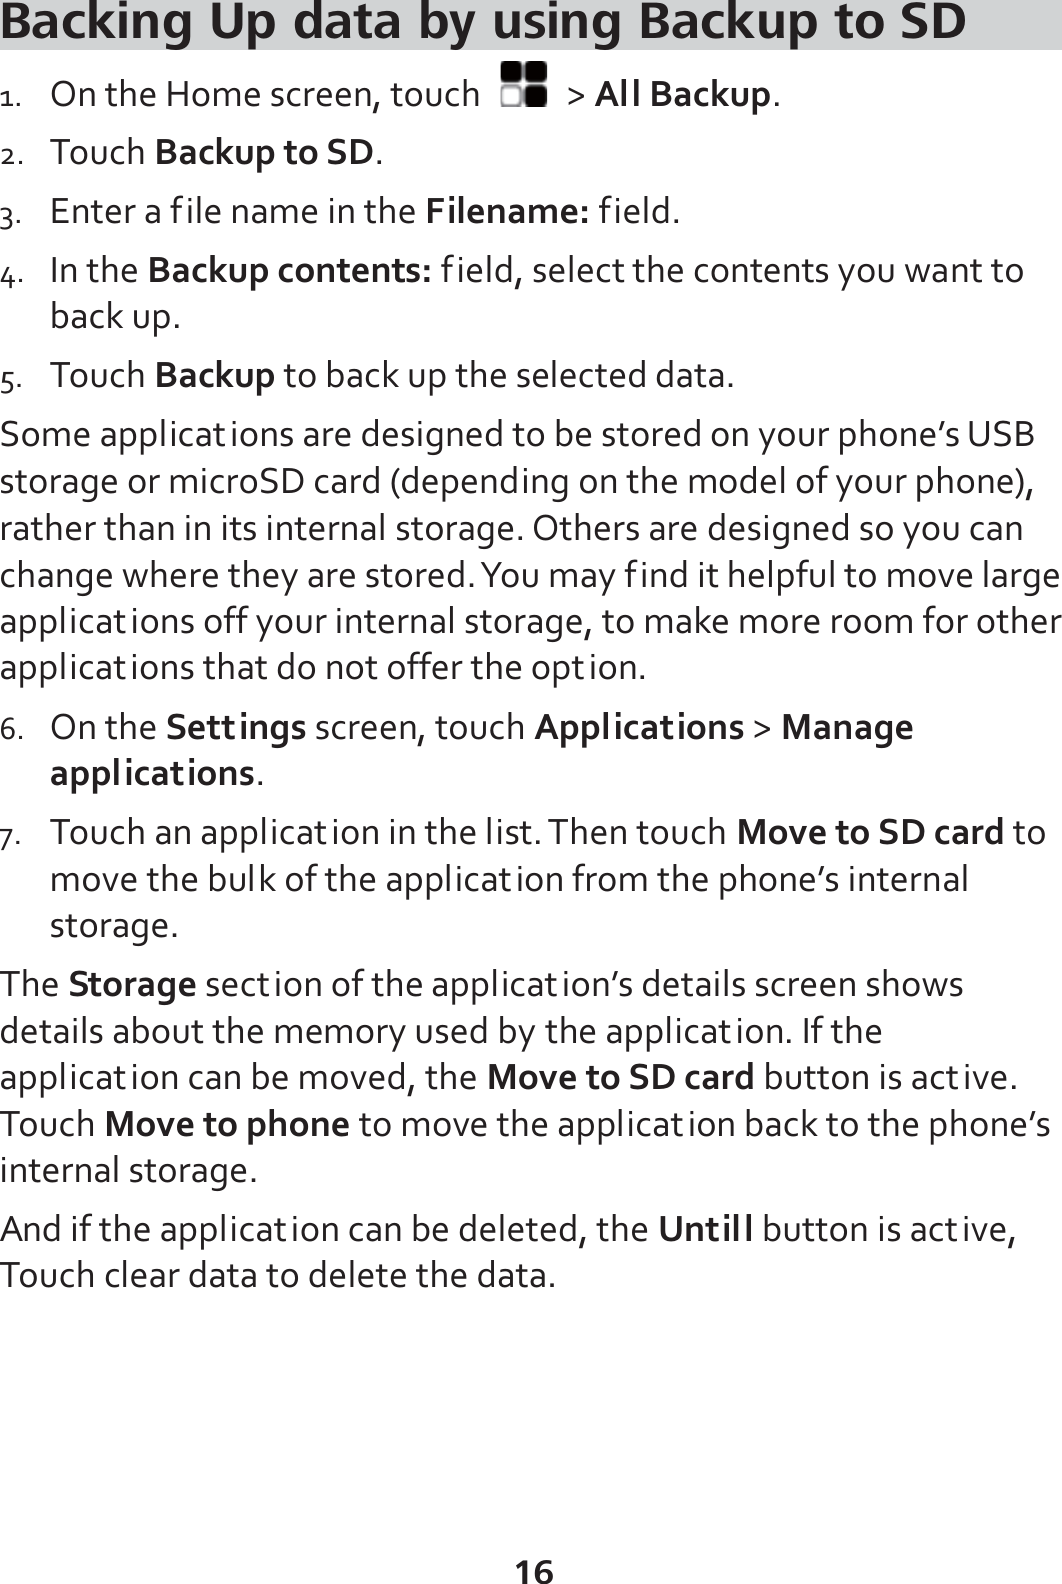 16 Backing Up data by using Backup to SD 1. On the Home screen, touch   &gt; All Backup. 2. Touch Backup to SD. 3. Enter a file name in the Filename: field. 4. In the Backup contents: field, select the contents you want to back up. 5. Touch Backup to back up the selected data. Some applications are designed to be stored on your phone’s USB storage or microSD card (depending on the model of your phone), rather than in its internal storage. Others are designed so you can change where they are stored. You may find it helpful to move large applications off your internal storage, to make more room for other applications that do not offer the option. 6. On the Settings screen, touch Applications &gt; Manage applications. 7. Touch an application in the list. Then touch Move to SD card to move the bulk of the application from the phone’s internal storage. The Storage section of the application’s details screen shows details about the memory used by the application. If the application can be moved, the Move to SD card button is active. Touch Move to phone to move the application back to the phone’s internal storage. And if the application can be deleted, the Untill button is active, Touch clear data to delete the data. 